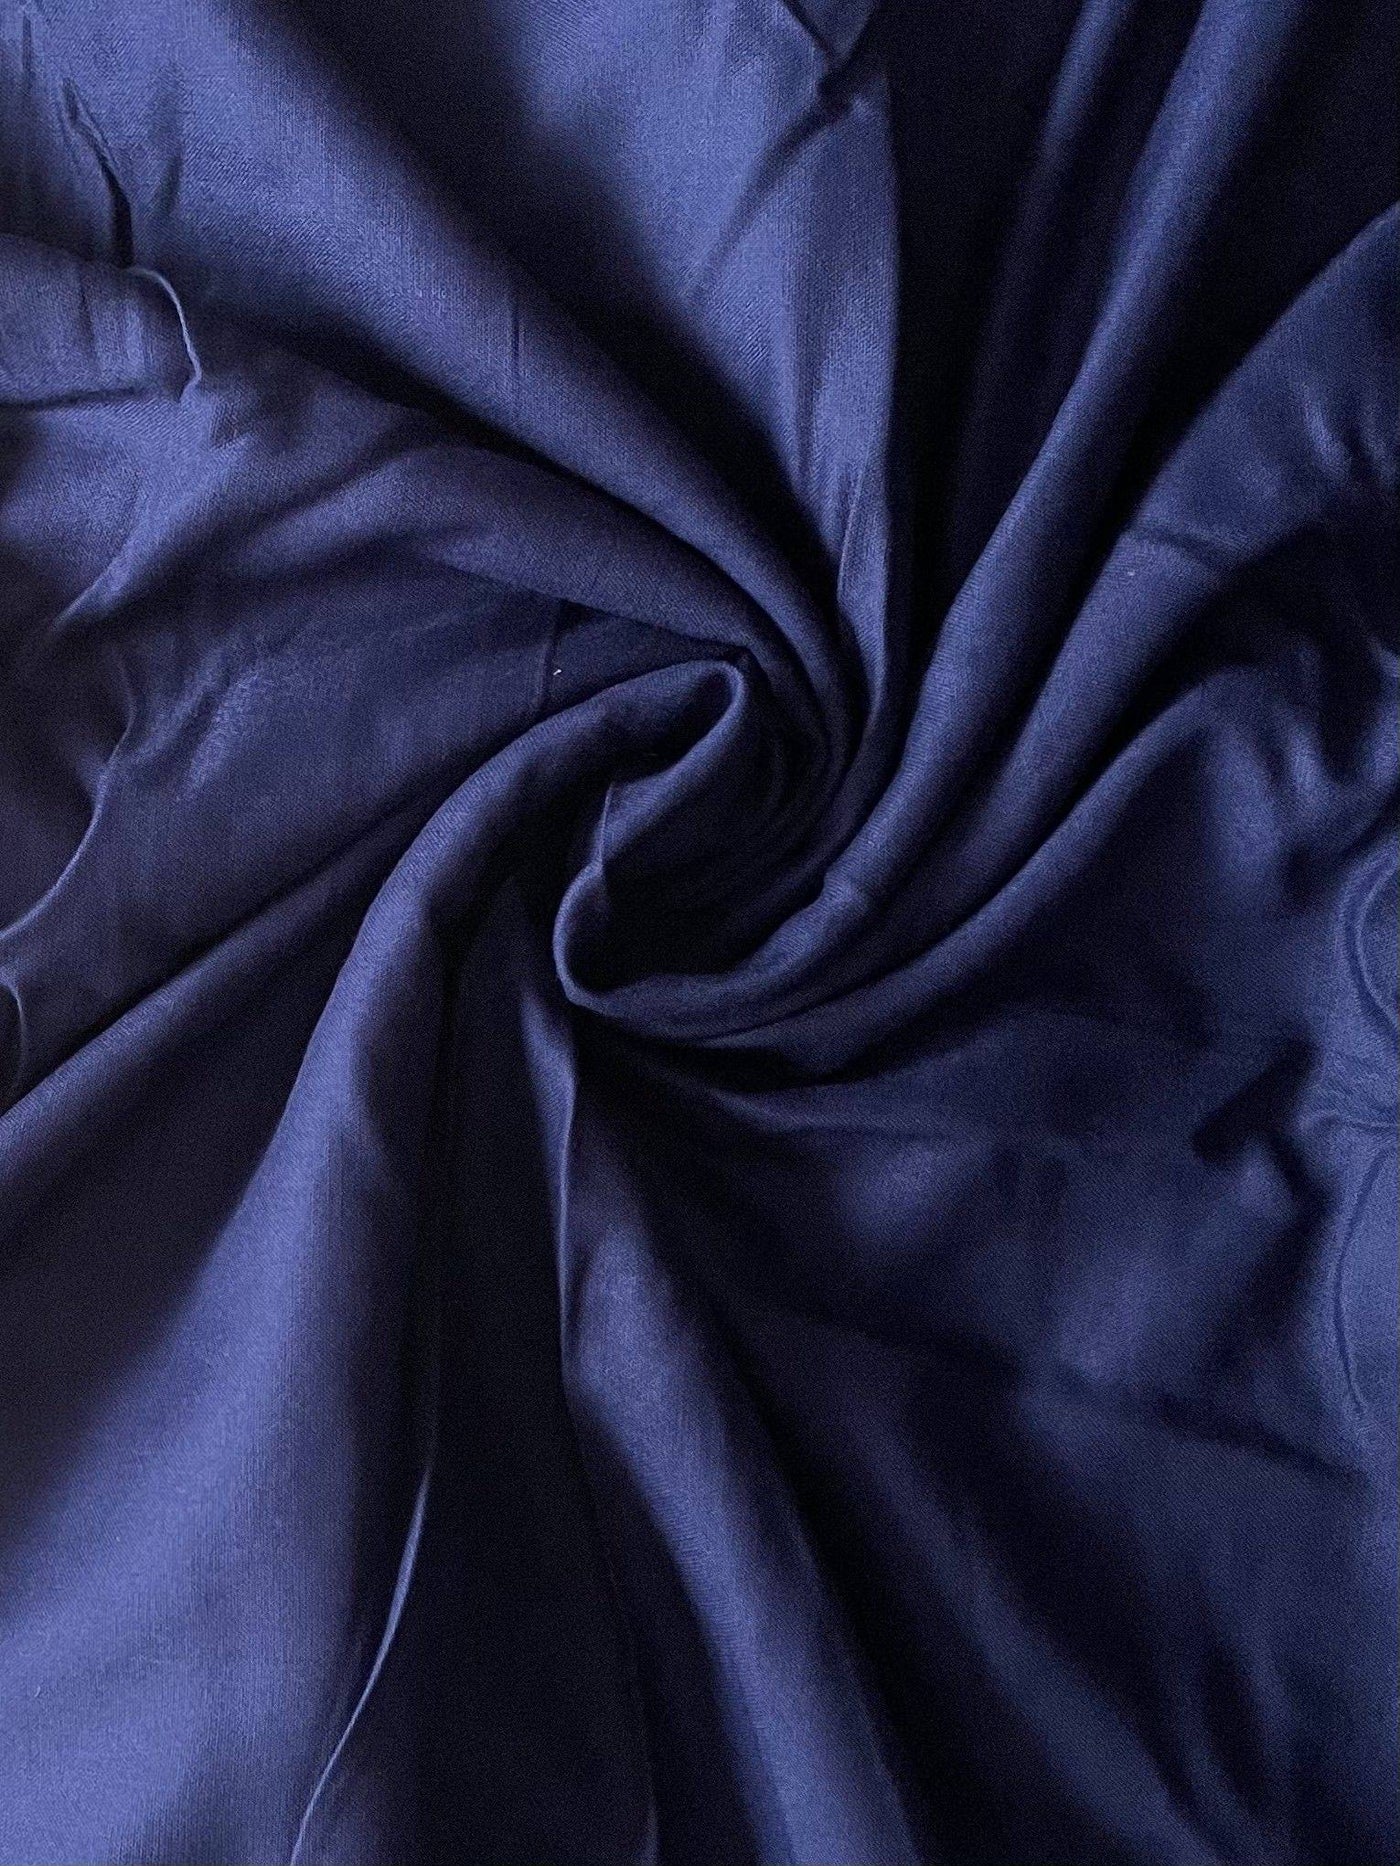 Essentials by Fabric Pandit Fabric Midnight Blue Color Pure Rayon Fabric